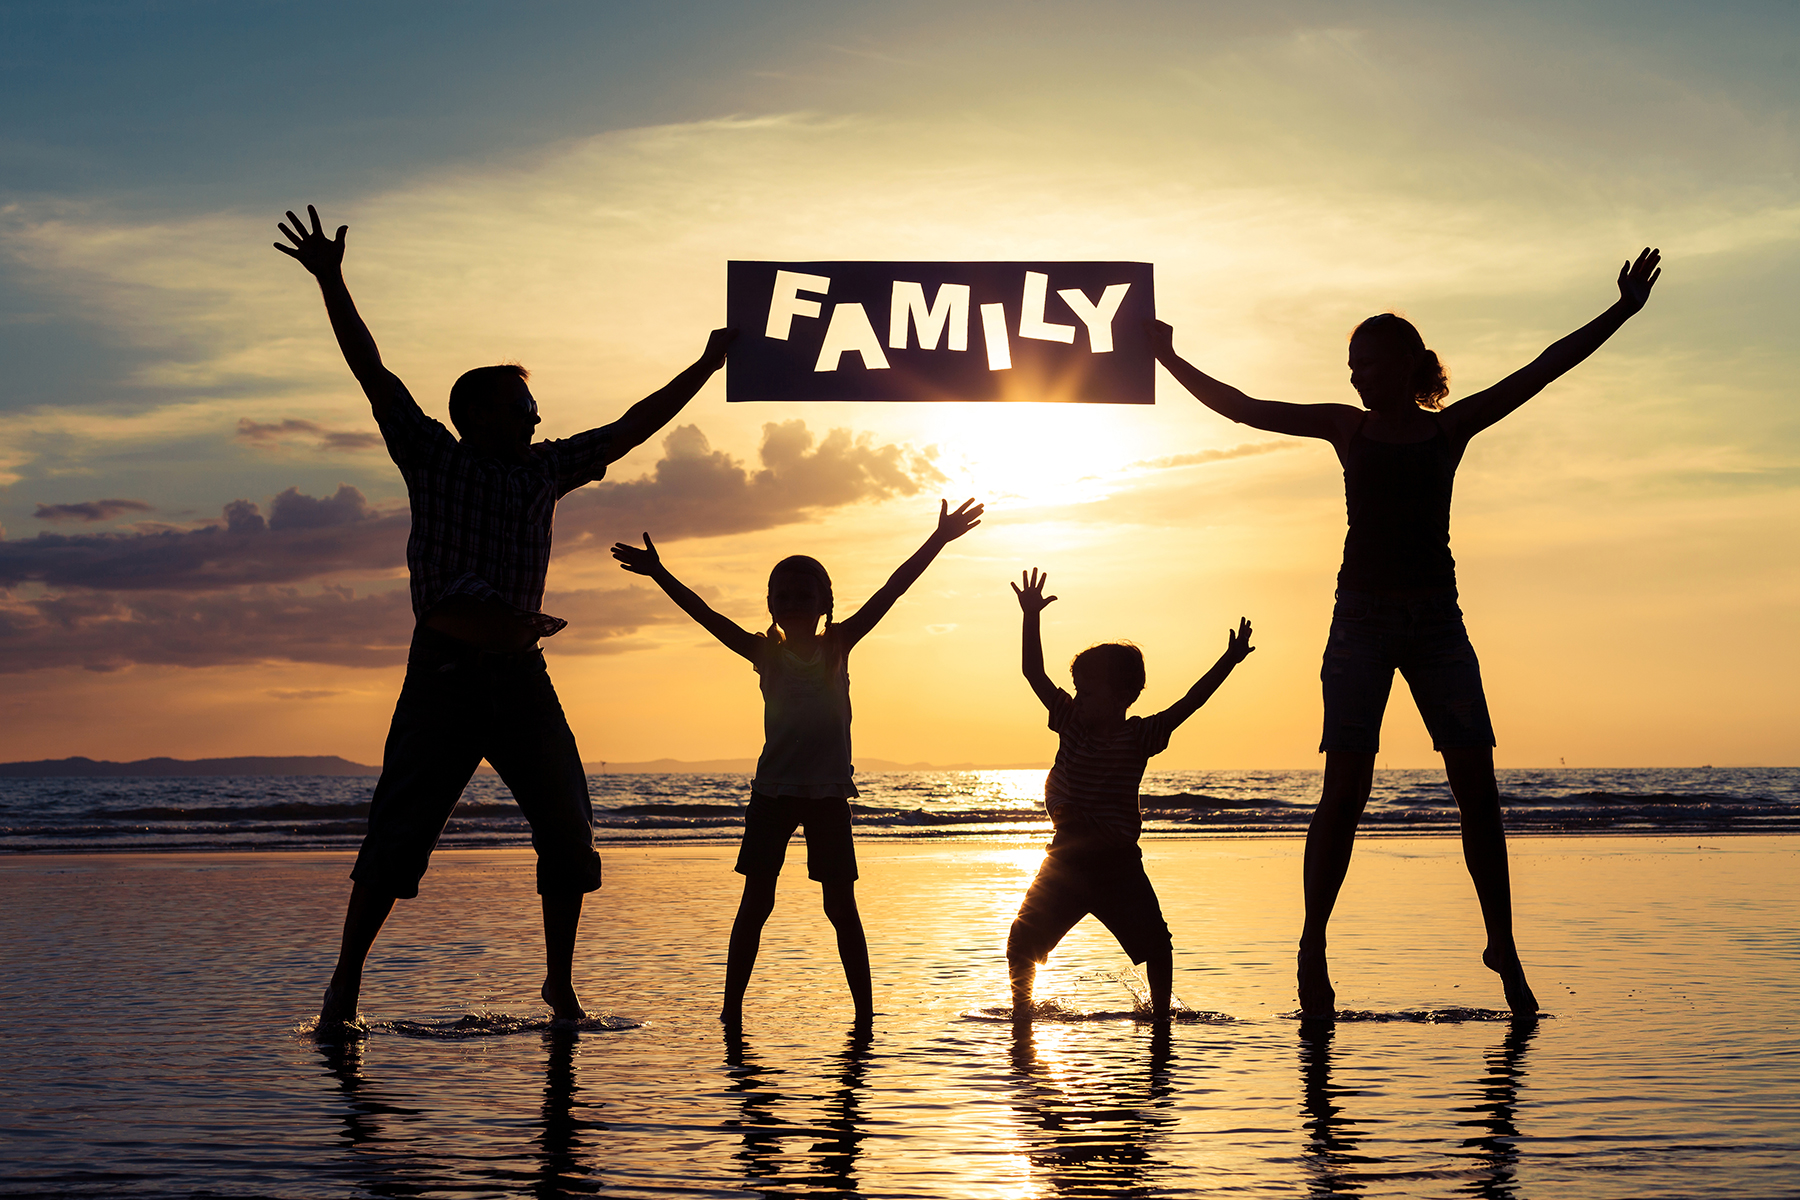 How To Have The Best Family Day Ever